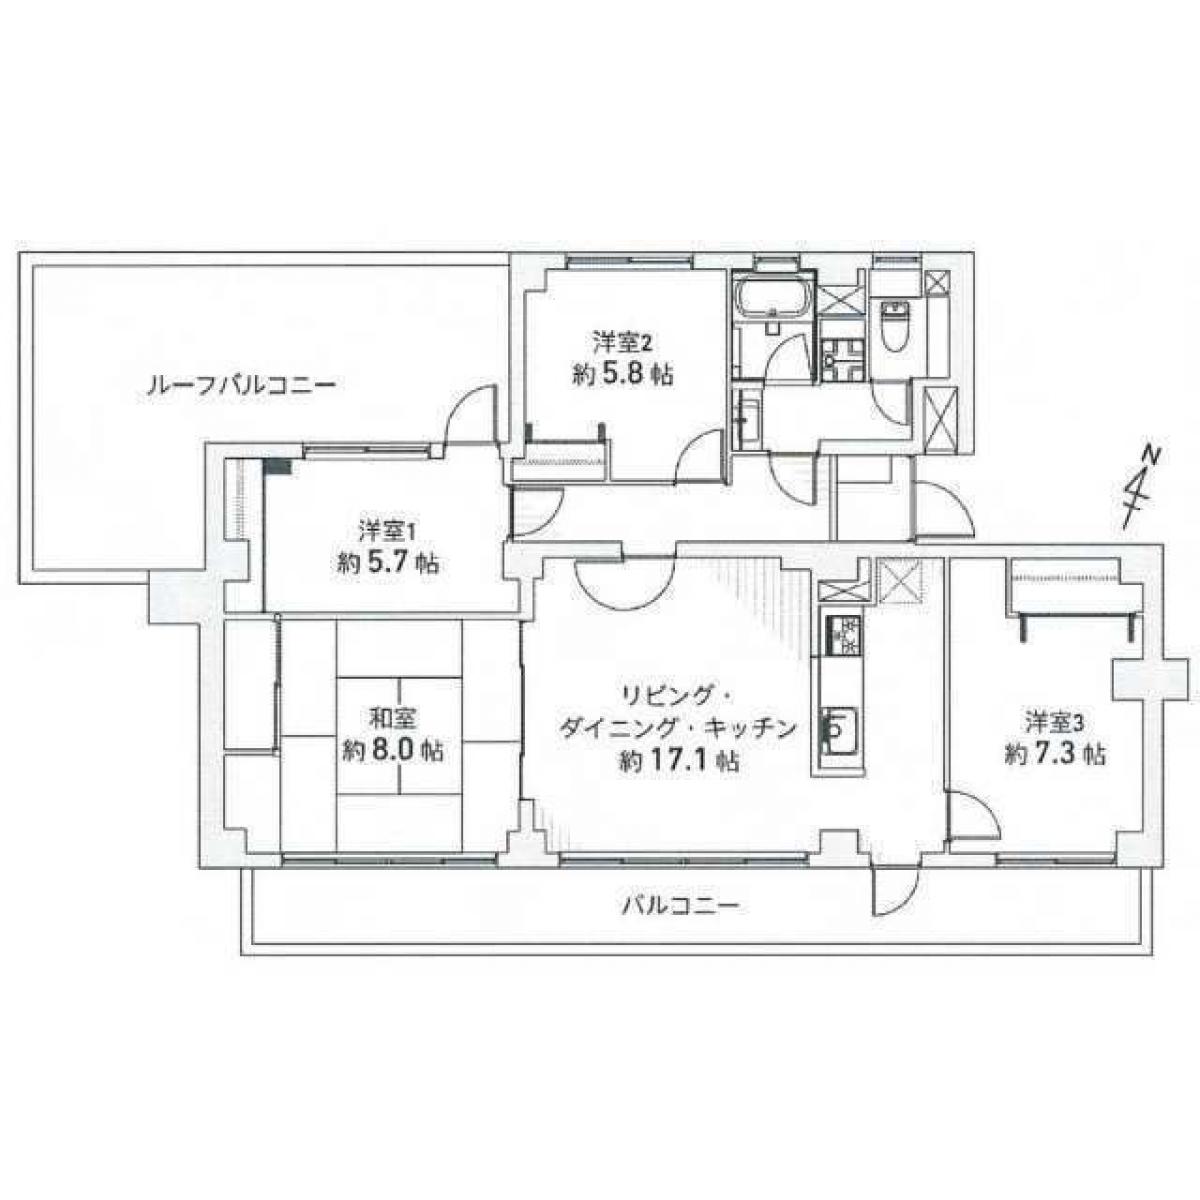 Picture of Apartment For Sale in Ichinomiya Shi, Aichi, Japan